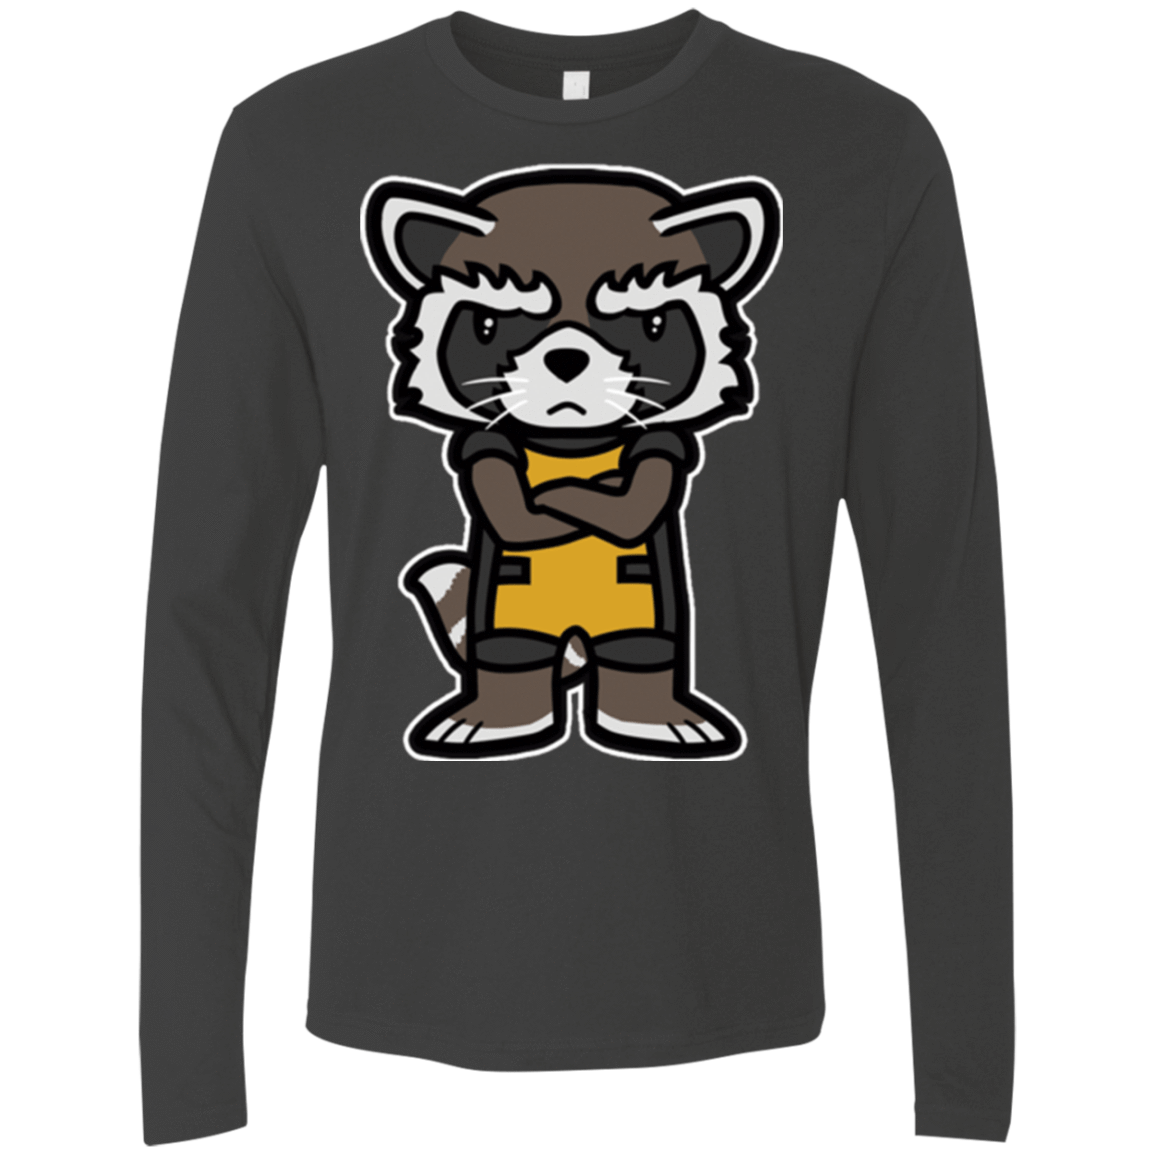 T-Shirts Heavy Metal / Small Angry Racoon Men's Premium Long Sleeve